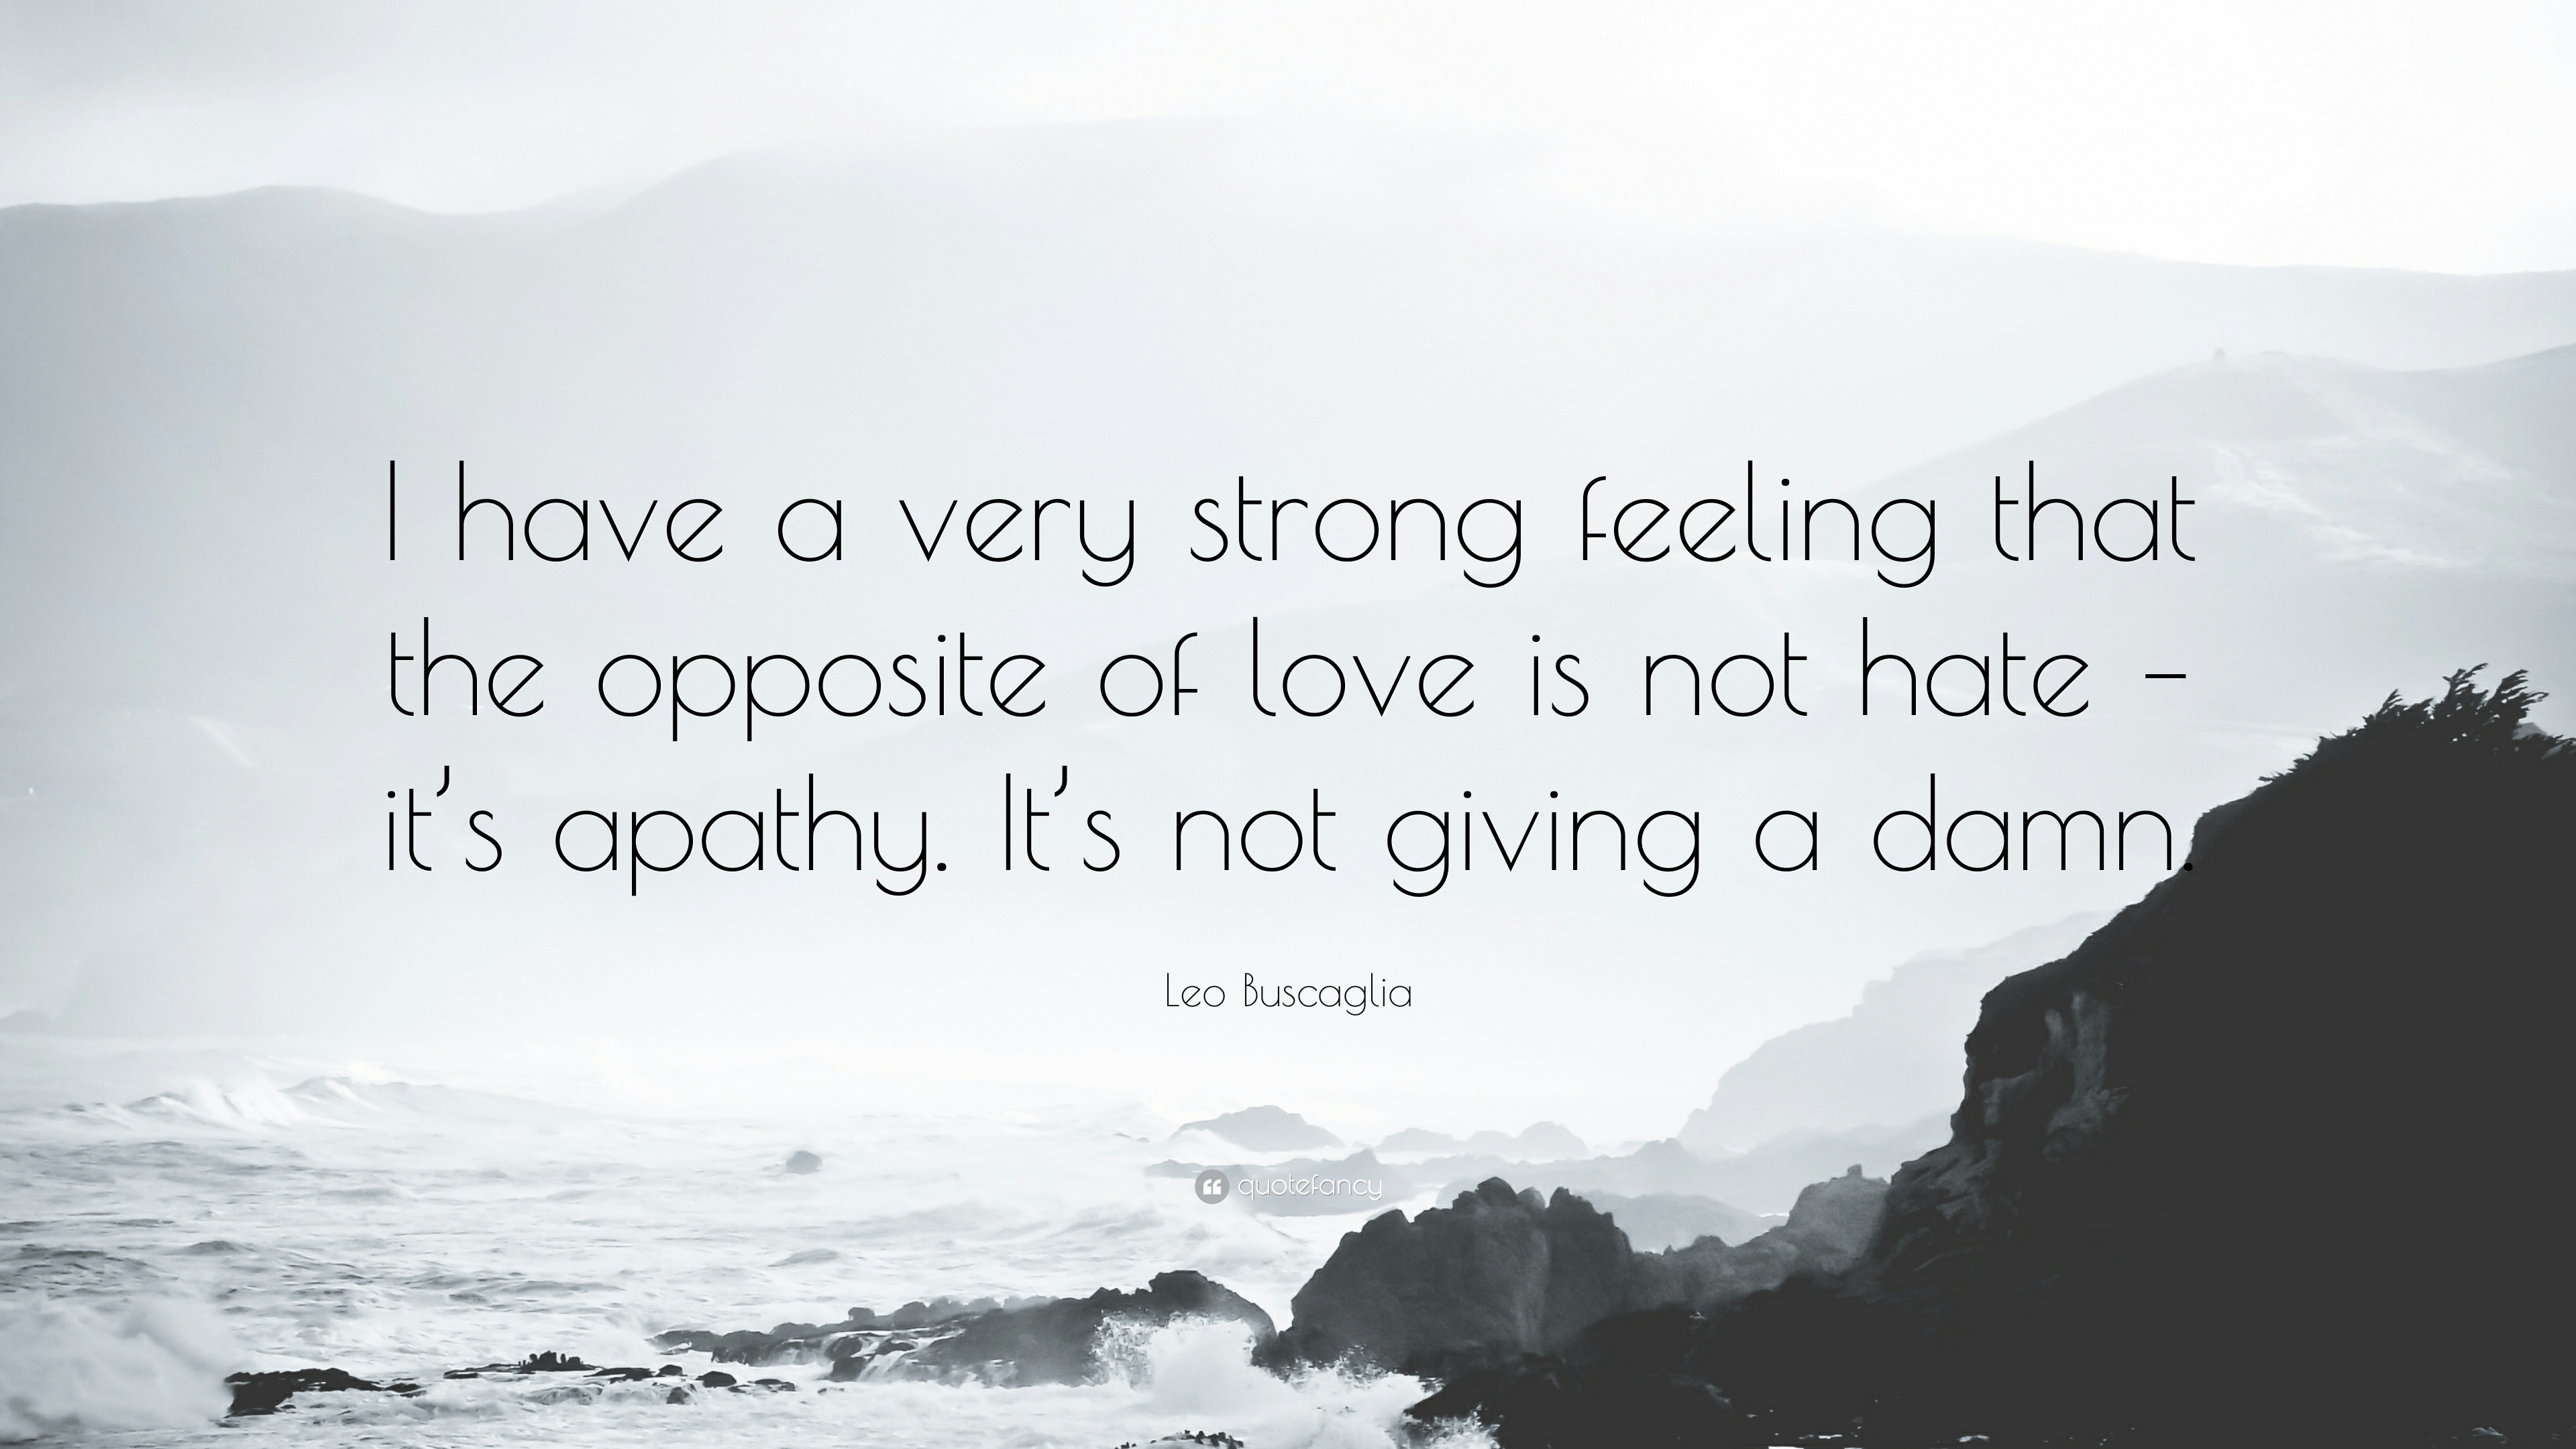 Hate Quotes “I have a very strong feeling that the opposite of love is